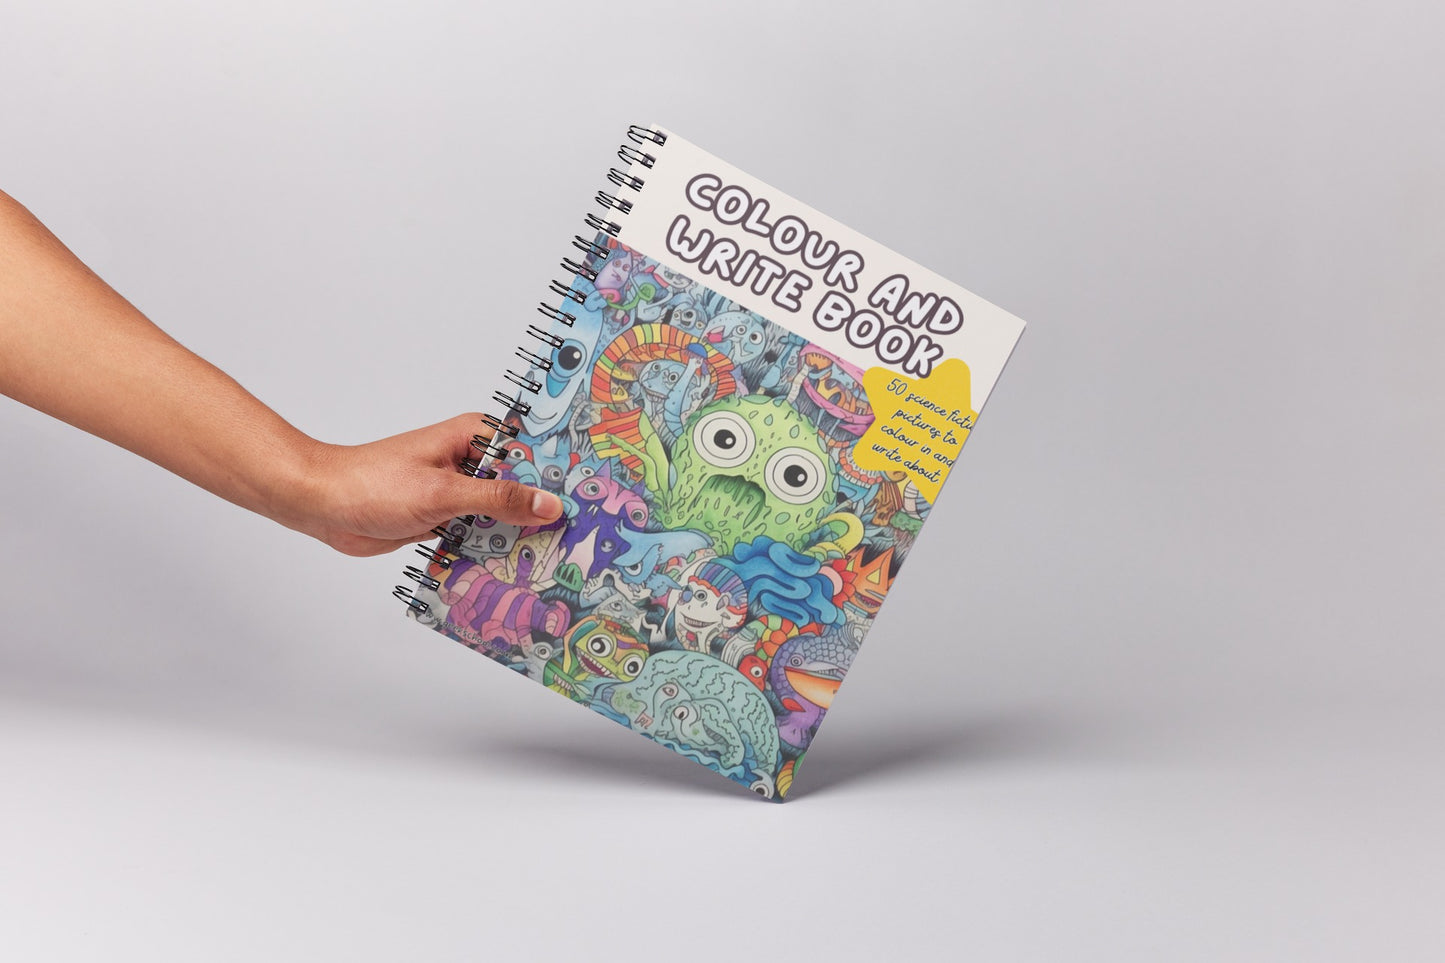 Colour and Write Printed Book | Colour Your Own Book | Book Posters | Colouring Book | Colouring Pages